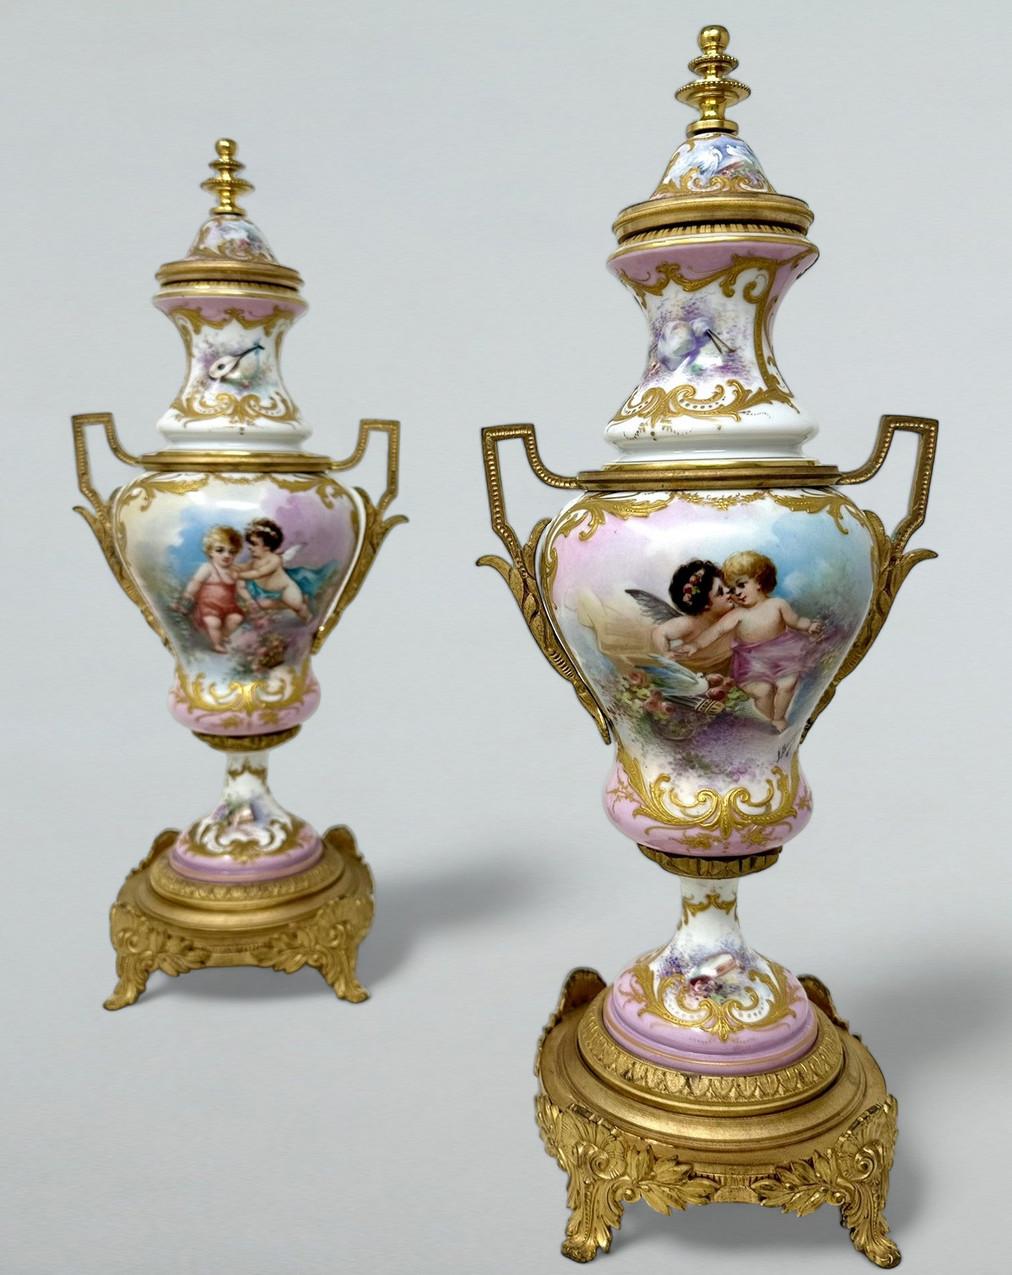 Stunning Pair of French Sevres Soft Paste Enameled Porcelain and Ormolu Twin Handle Table or Mantle Urns of traditional urn form and of outstanding quality, and good size proportions, each raised on a square stepped base with very ornate scrolling